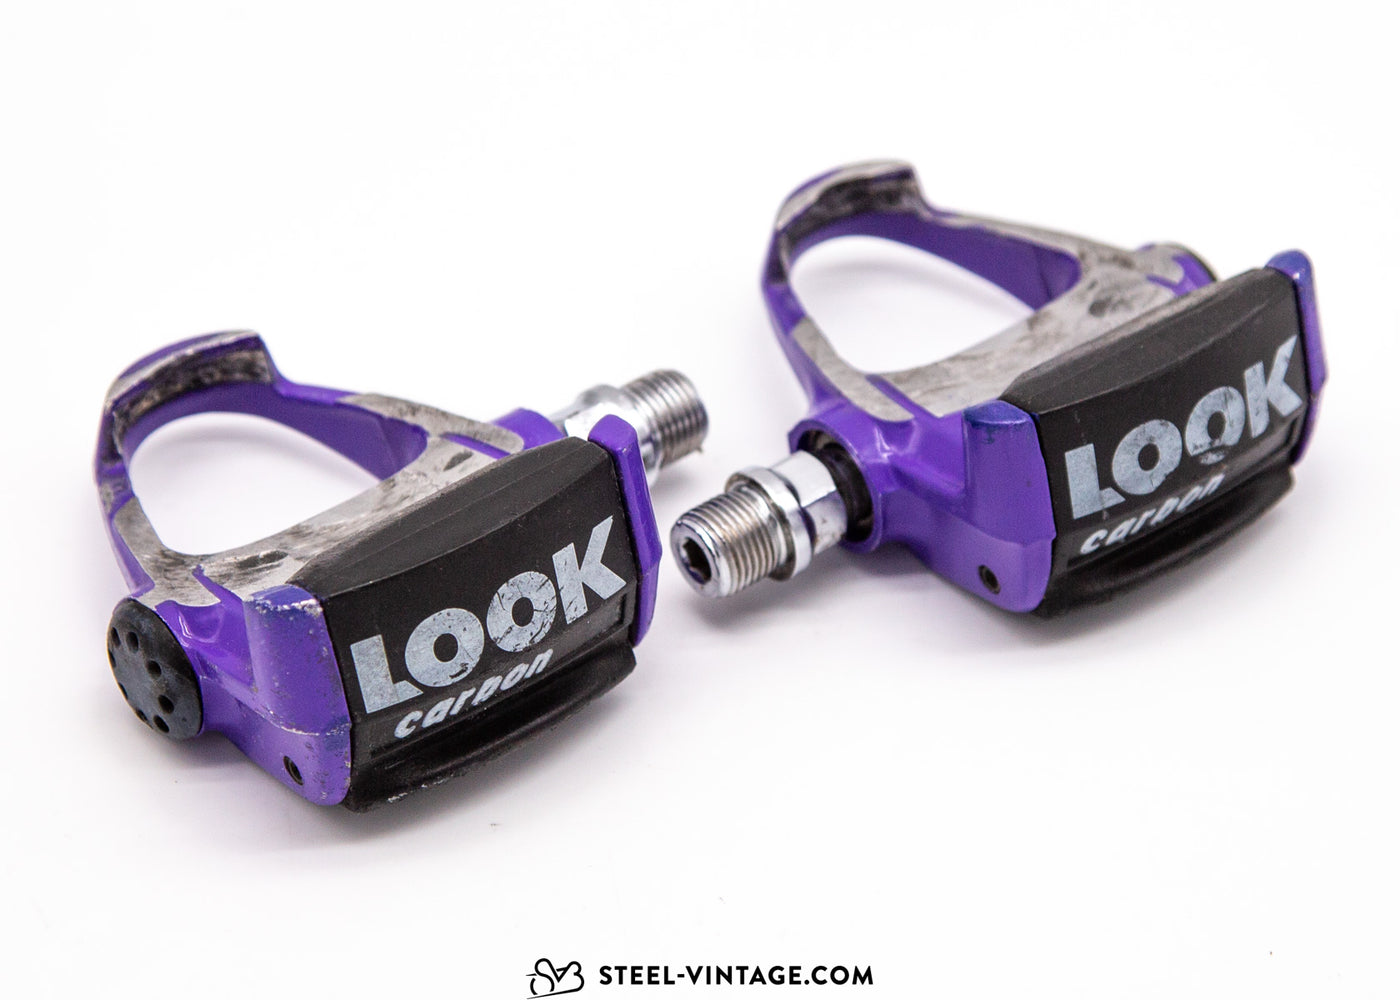 Look Carbon Pedals